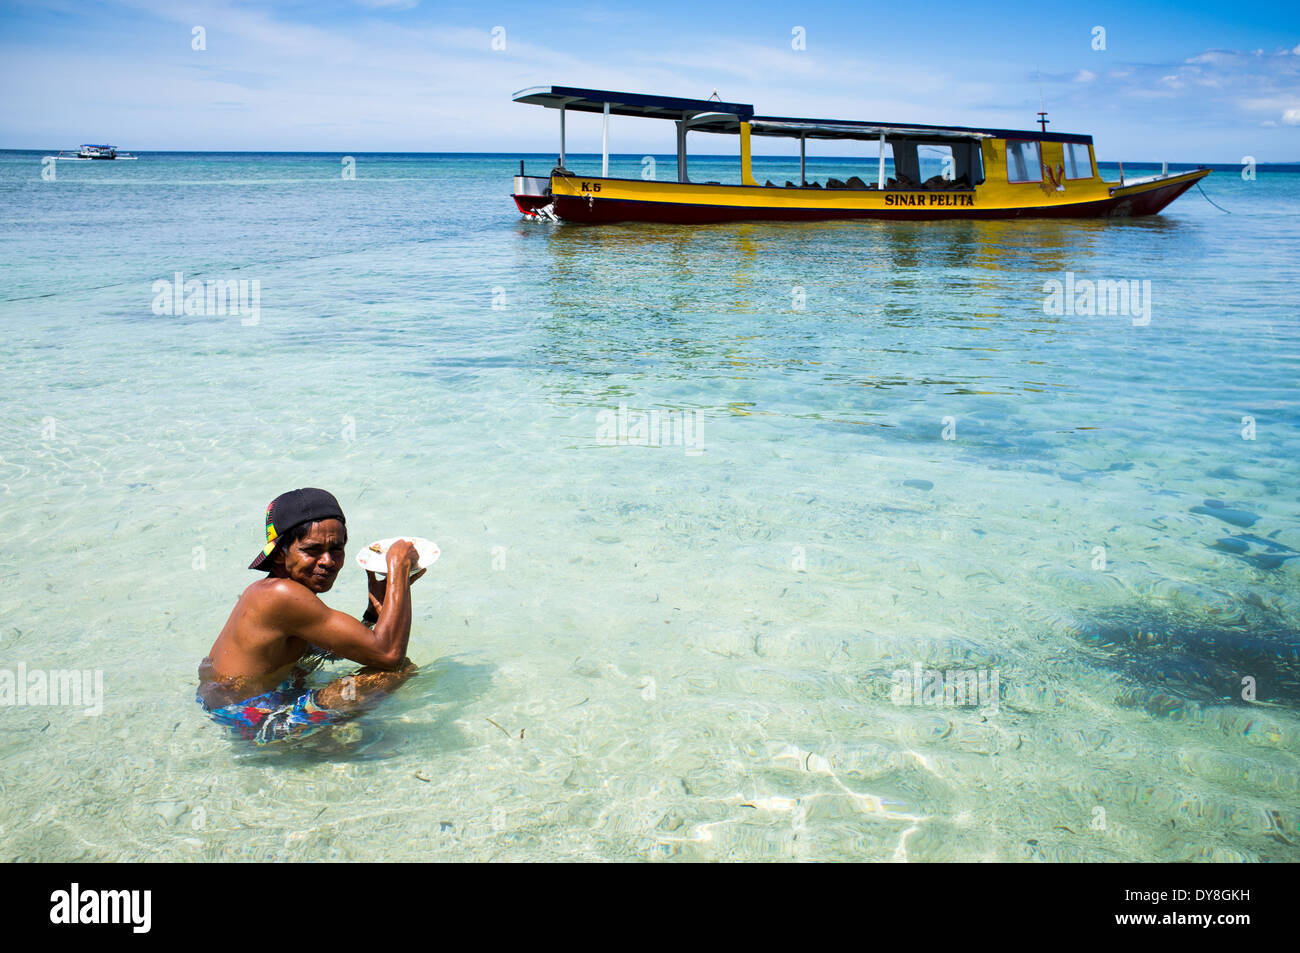 local man eating in the water, Gili island, Lombok, Indonesia, Asia Stock Photo